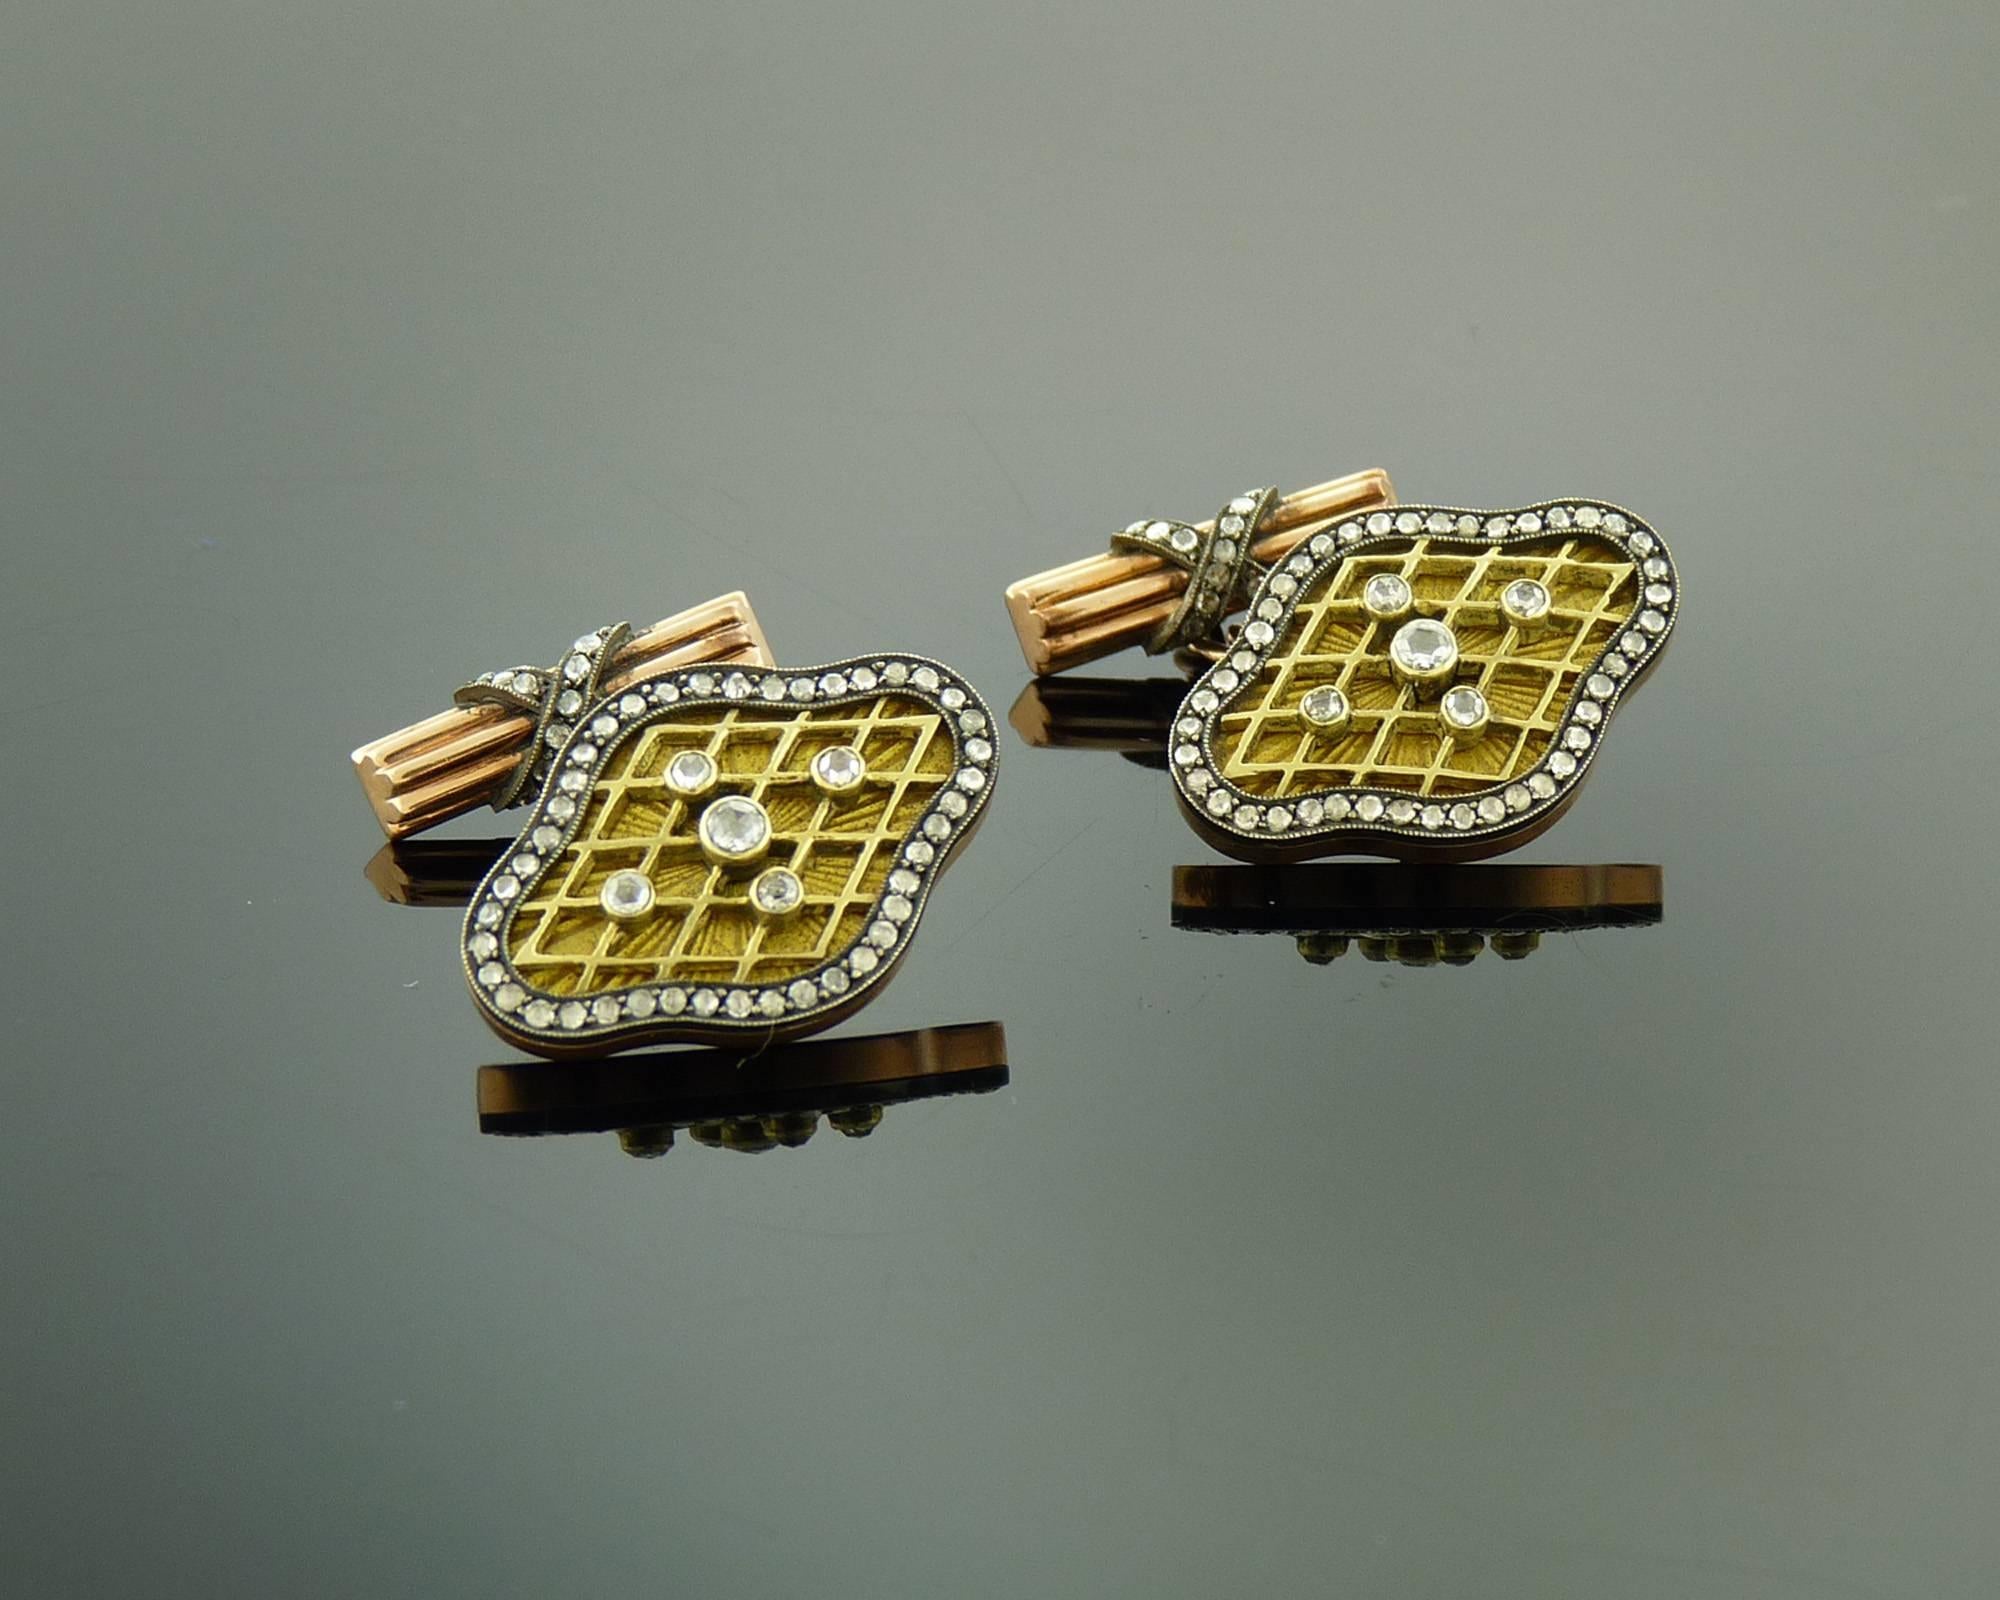 Outstanding and well balanced, beautiful pair of rose-cut diamond and yellow enamel cuff-links in  Russian Imperial style.  
The design features rose-cut diamonds set in silver on top of rose gold on the yellow enamel ground.  
The total diamond